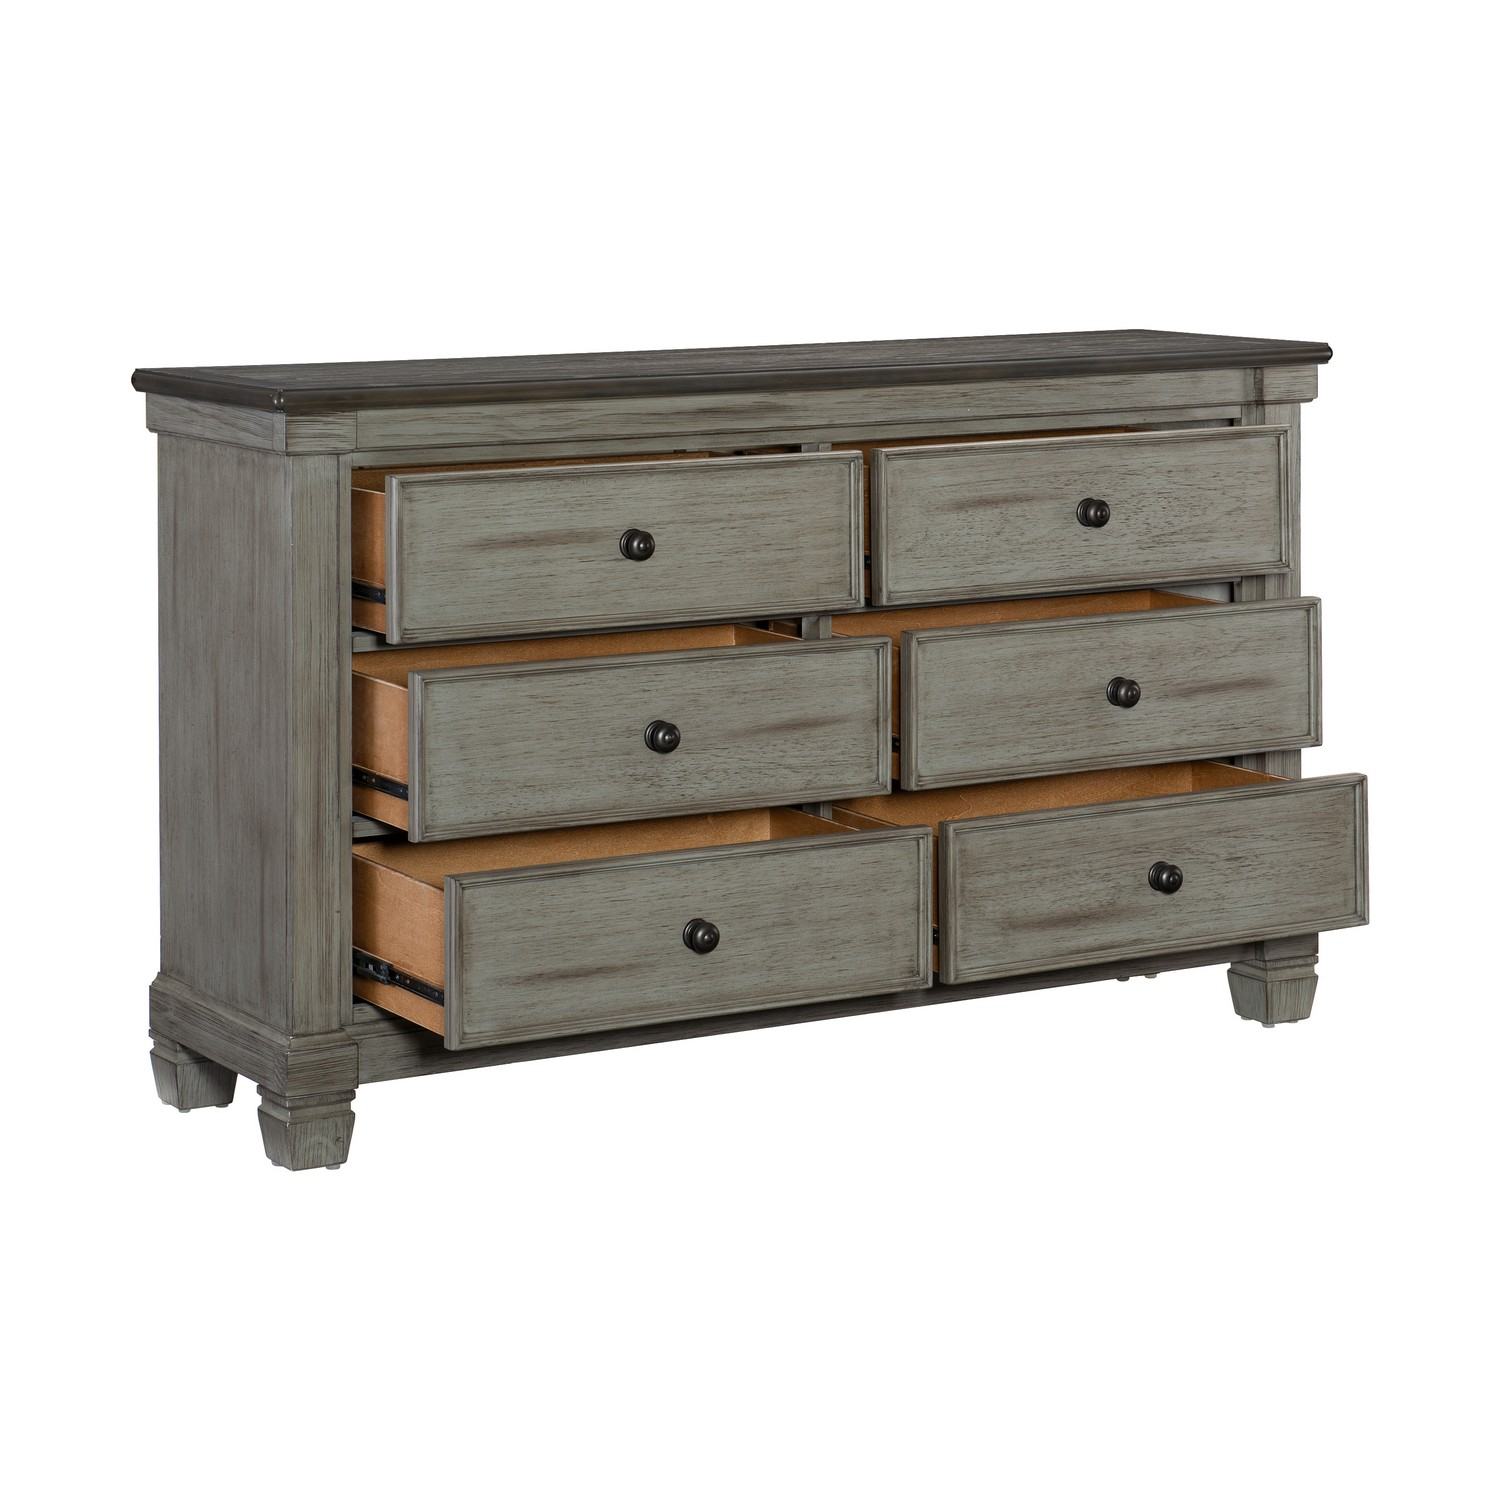 Homelegance Weaver Dresser - Two-tone : Antique Gray And Coffee